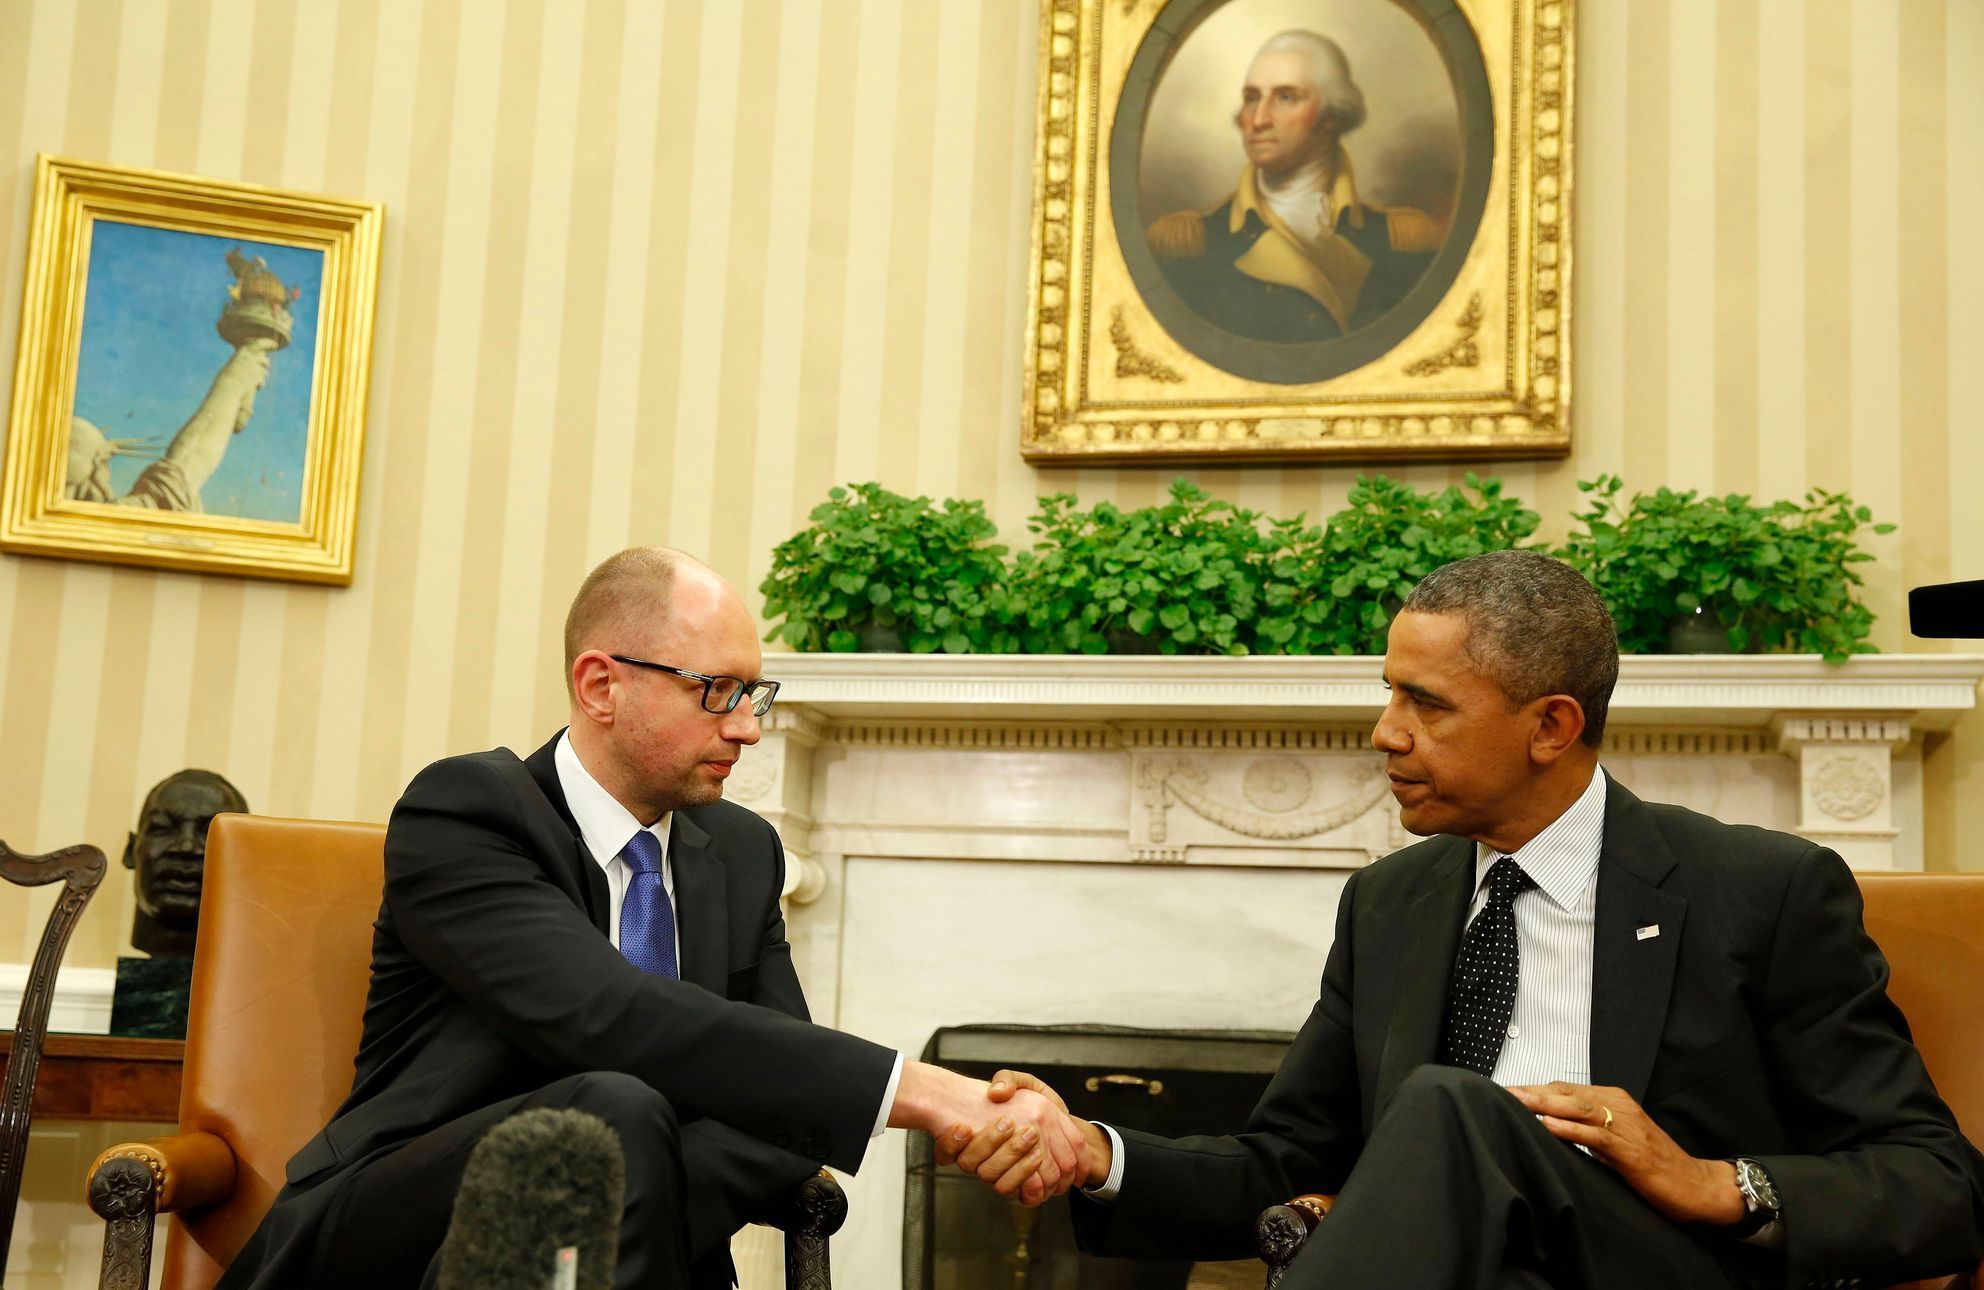 U.S. President Barack Obama shakes hands as he hosts a meeting with Ukraine Prime Minister Arseniy Yatsenyuk in the Oval Office of the White House in Washington